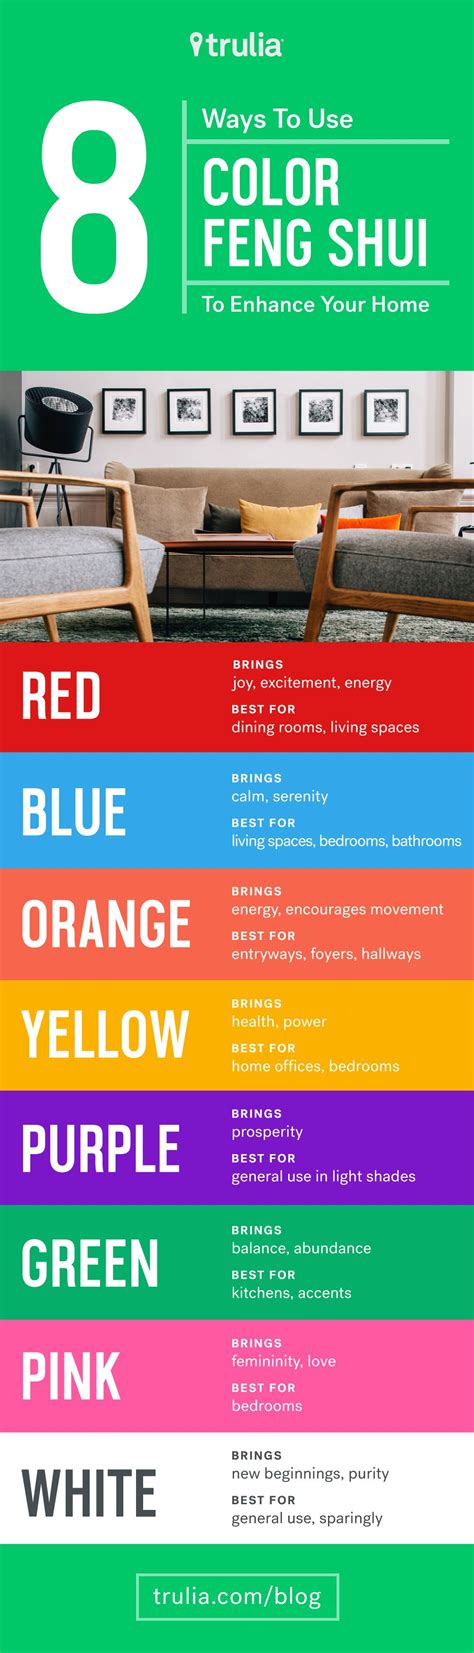 8 Reasons To Use Color Feng Shui To Enhance Your Home Life At Home